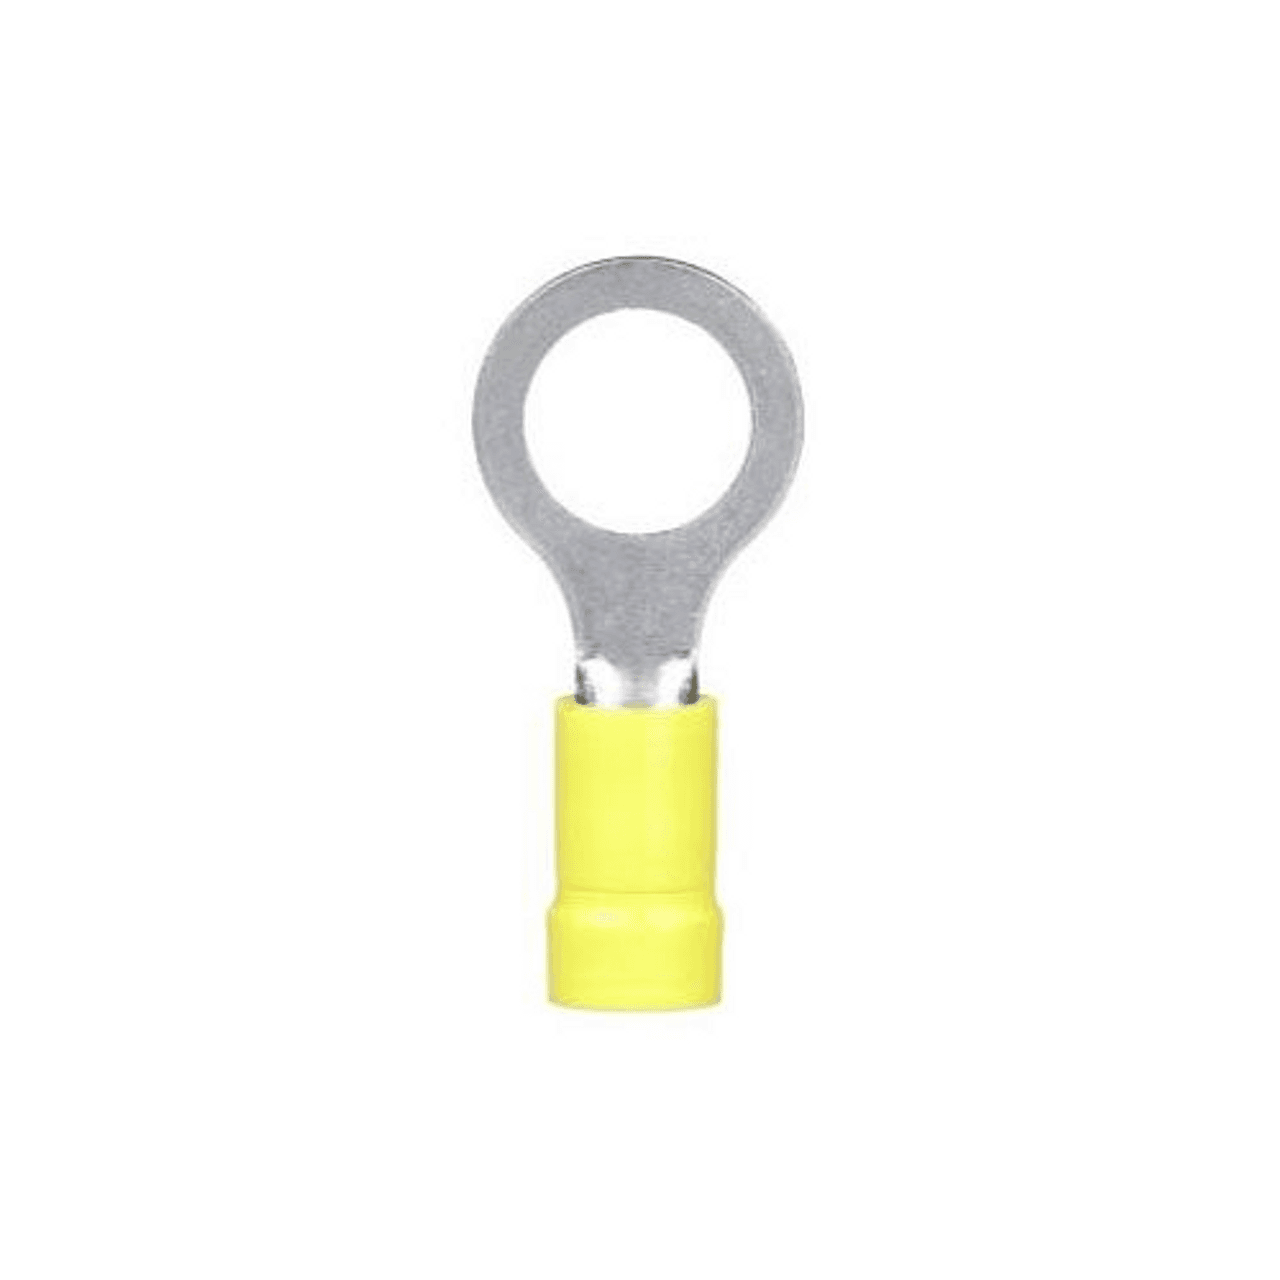 Panduit PV10-38R-L VINYL INSULATED RING TERMINAL12-10 AWG 3/8" STUD HOLE FUNNLENTRY YEL PK/50 ROHS